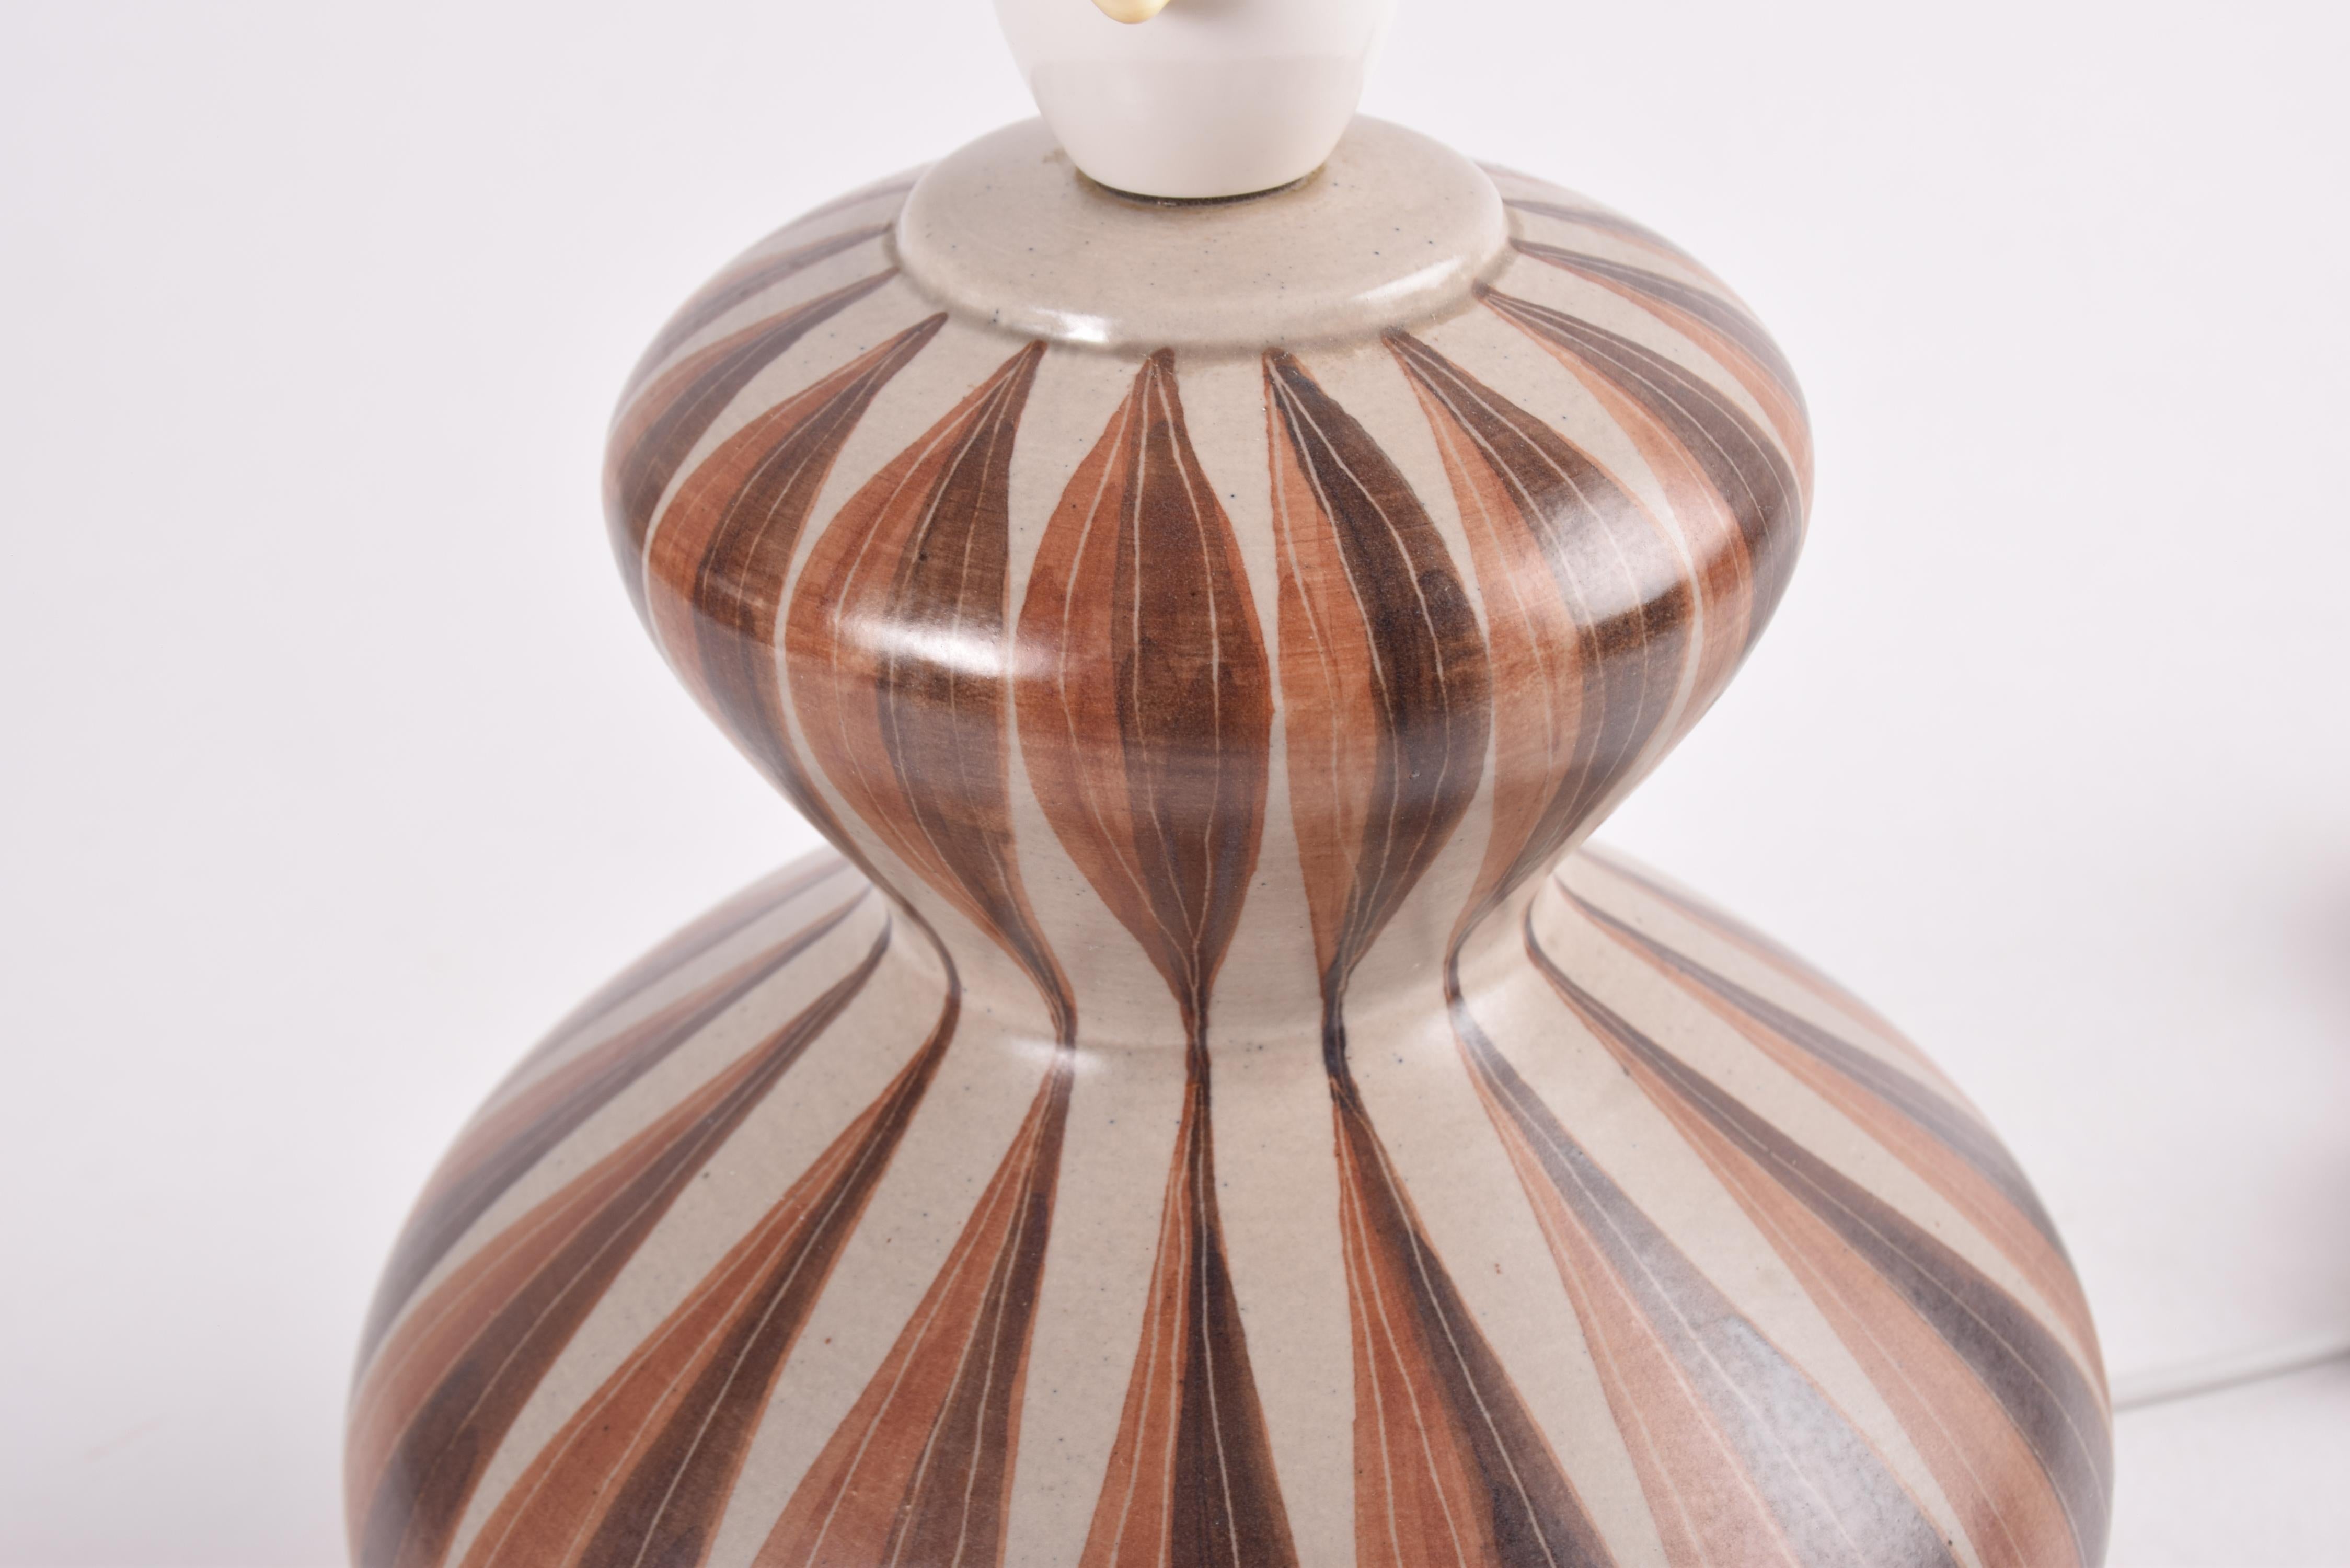 Ceramic Danish Sculptural Table Lamp with Brown Stripes by Eva & Johannes Andersen 1960s For Sale